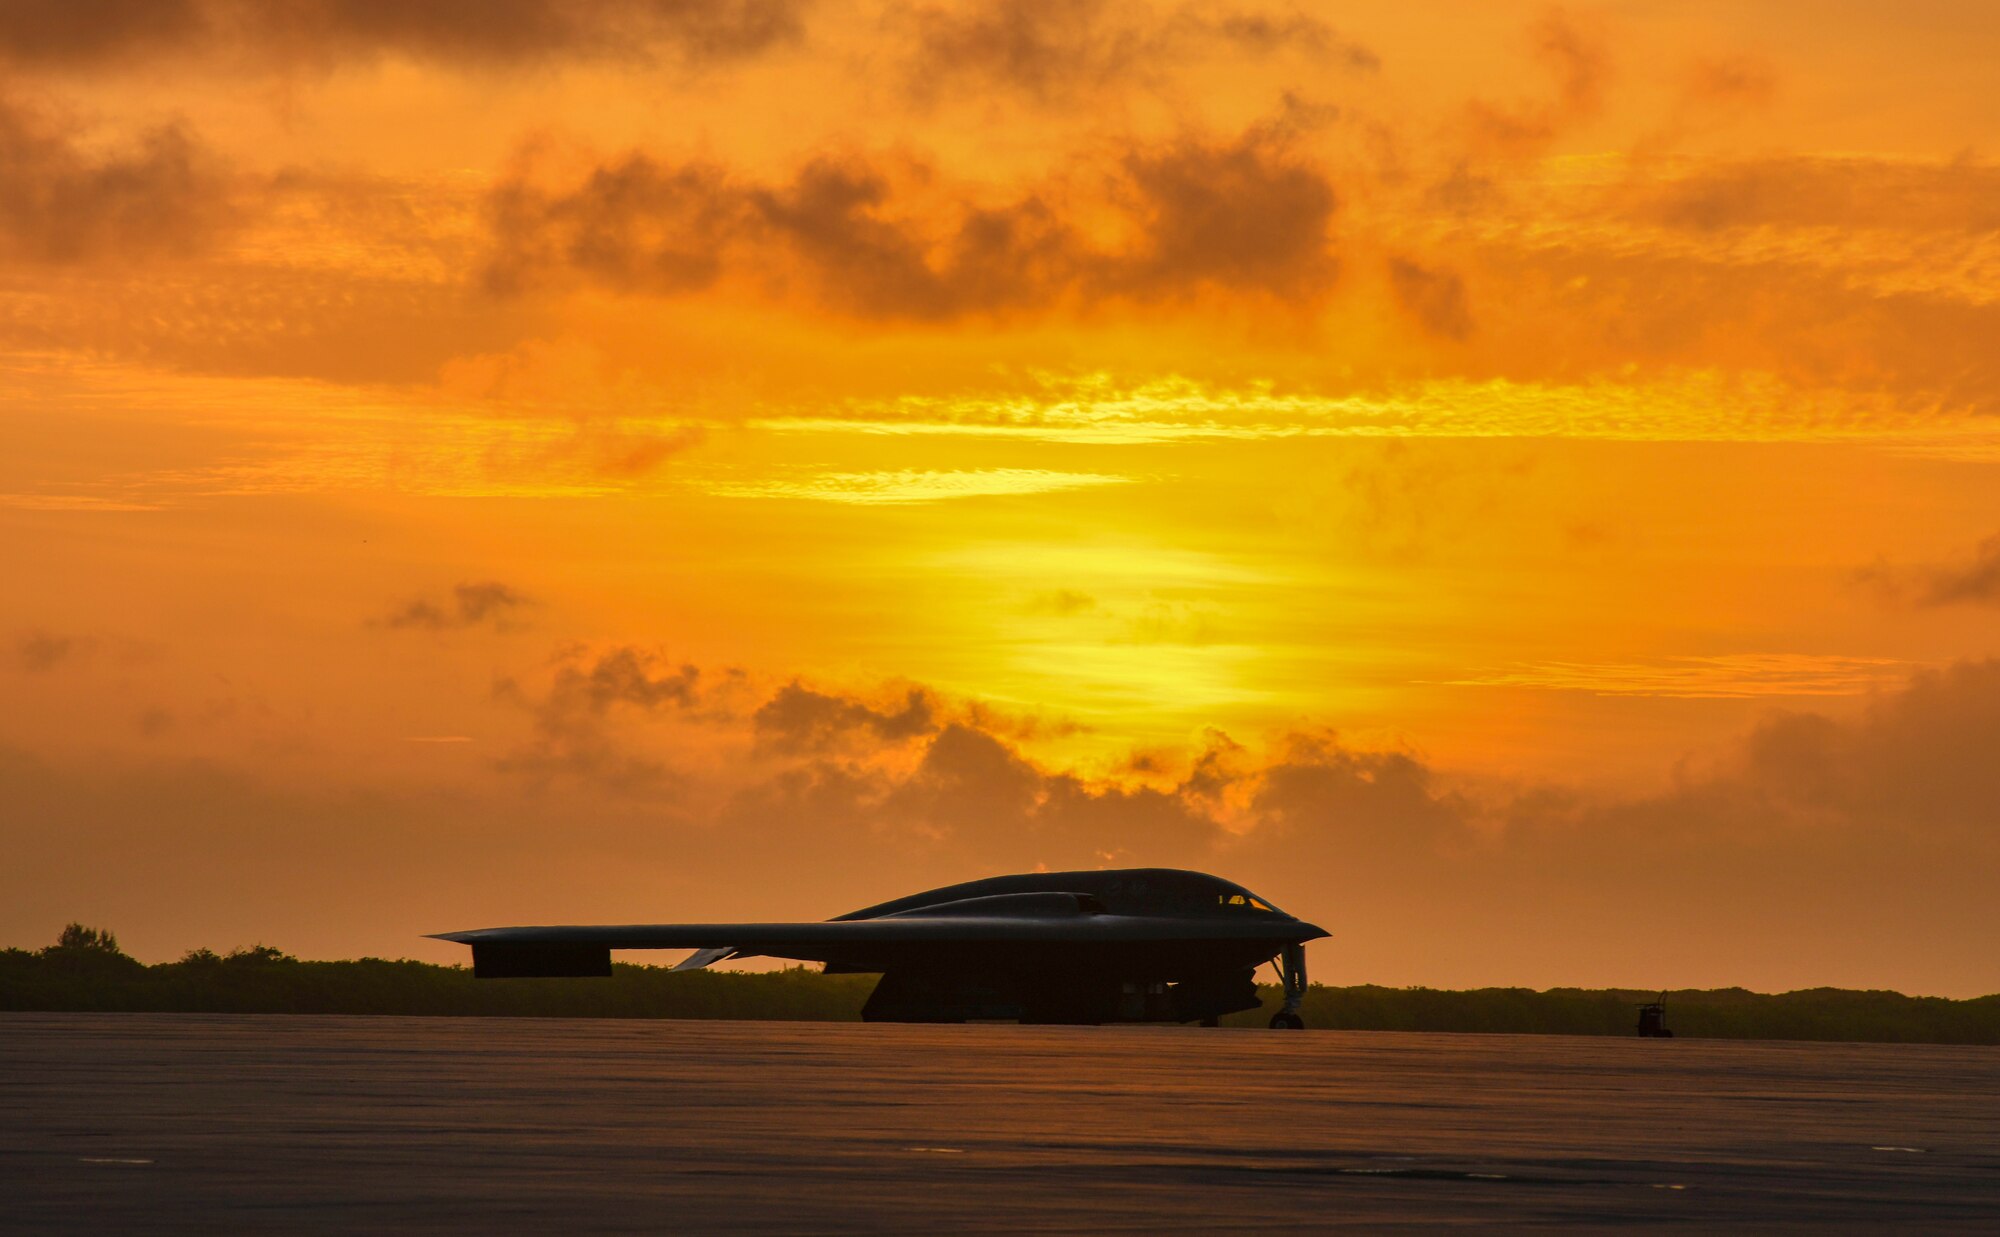 A B-2 Spirit Stealth Bomber, from Whiteman Air Force Base, Missouri, sits on the flight line of Naval Support Facility Diego Garcia, in support a Bomber Task Force deployment, Aug. 24, 2020. As part of their BTF deployment, the B-2s participated in a combined United States-Australia exercise with Marine Rotational Force – Darwin and Australian Defence Forces. (U.S. Air Force photo by Tech. Sgt. Heather Salazar)